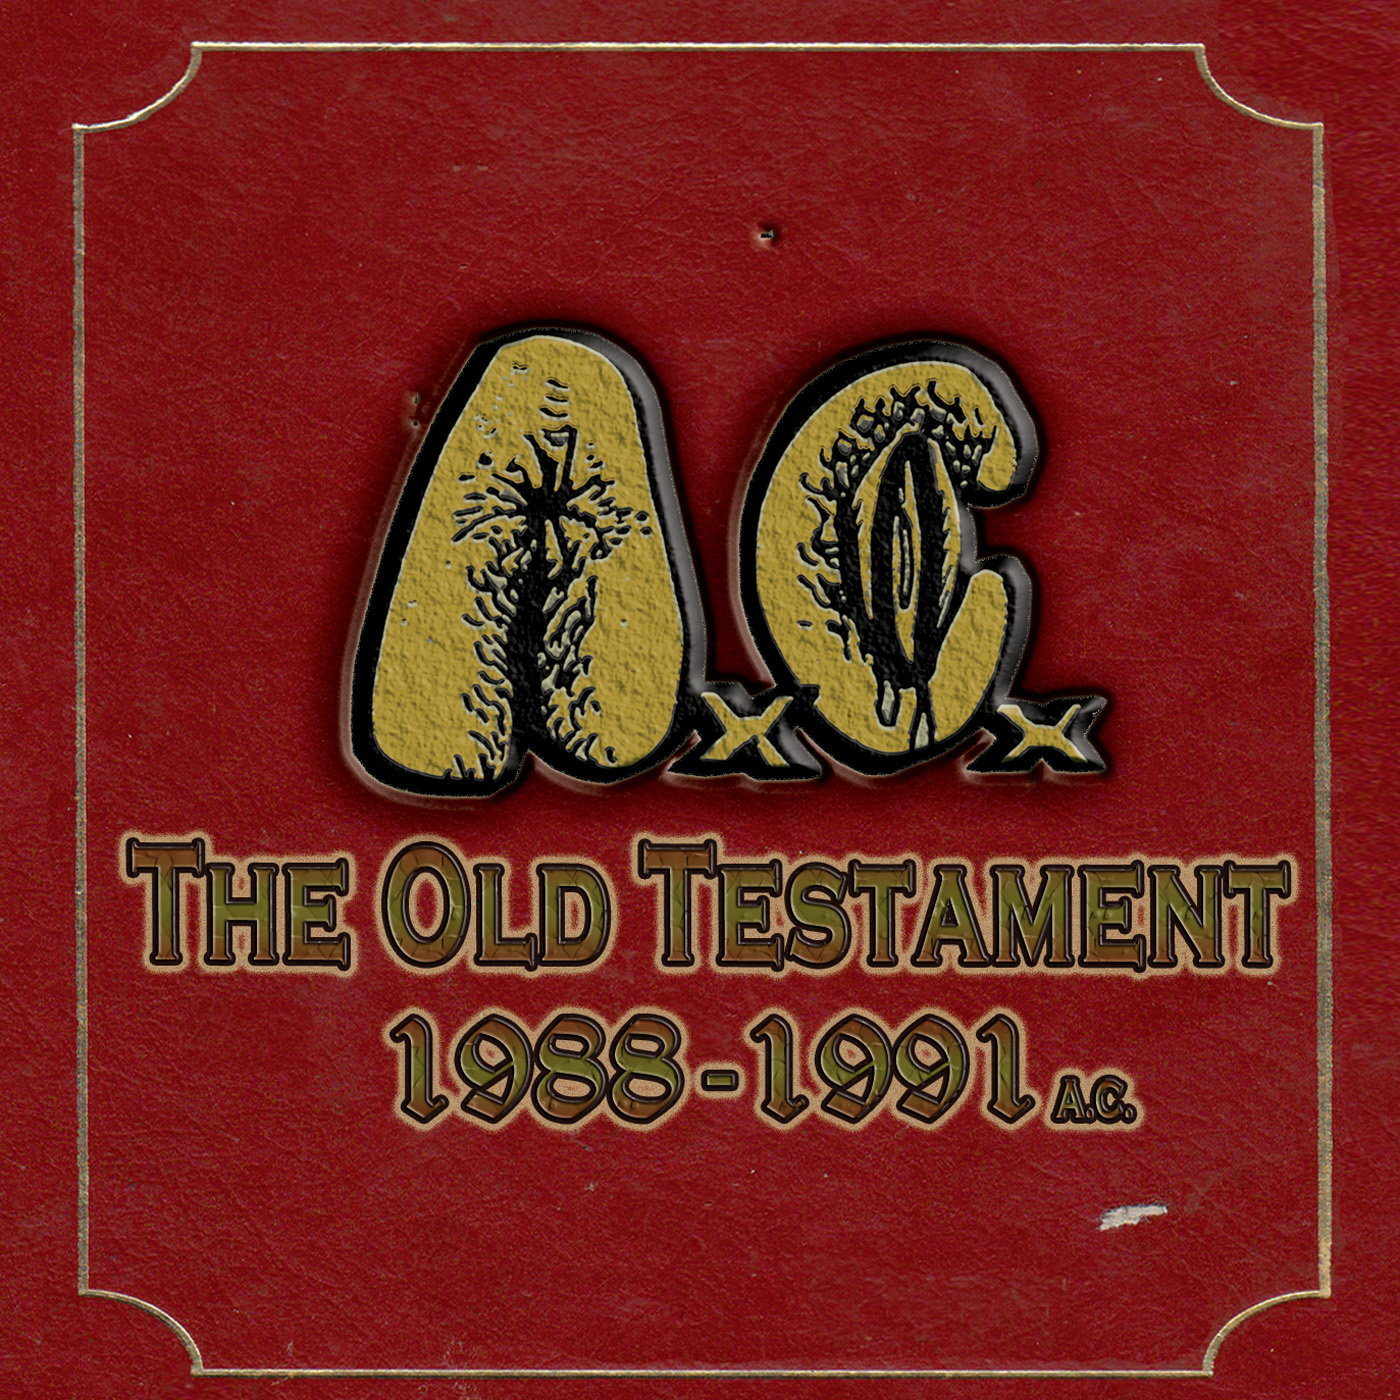 Anal Cunt – The Old Testament